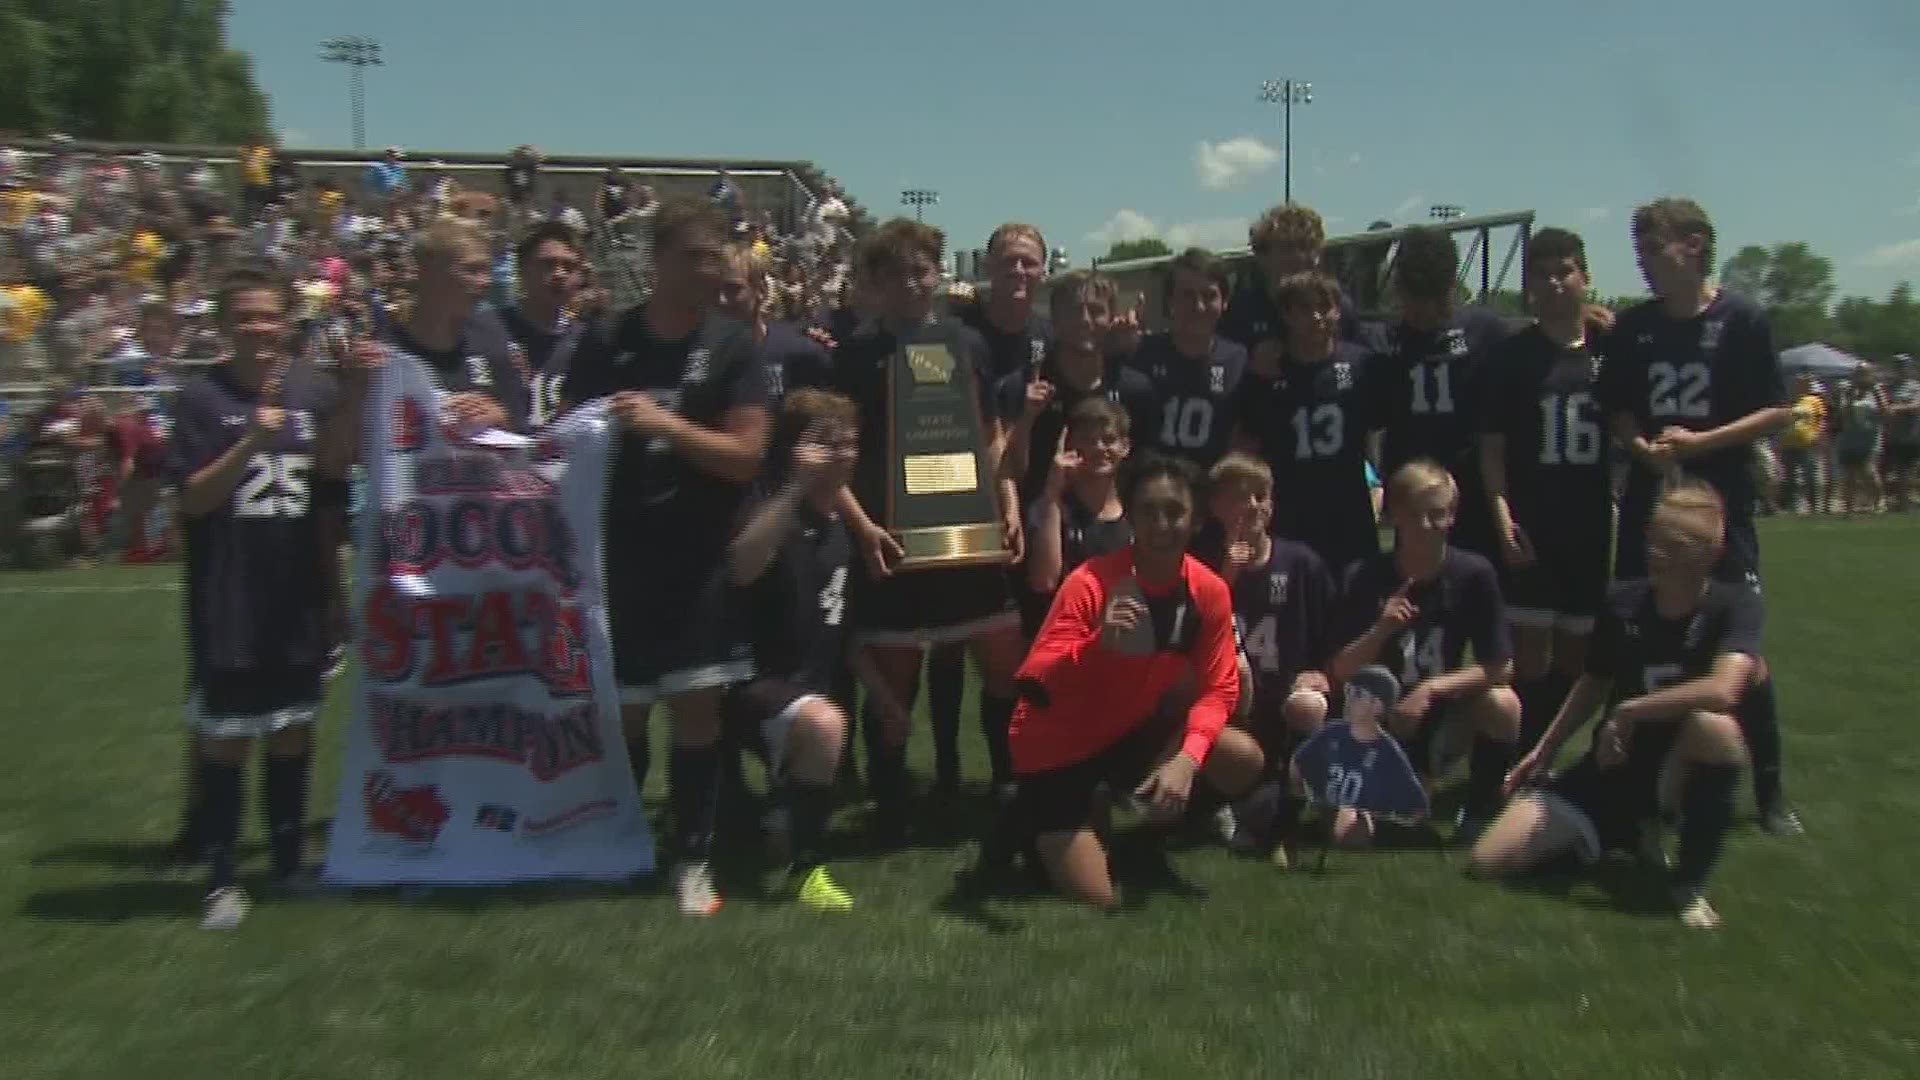 West Burlington ND wins their first ever State Title in Soccer.